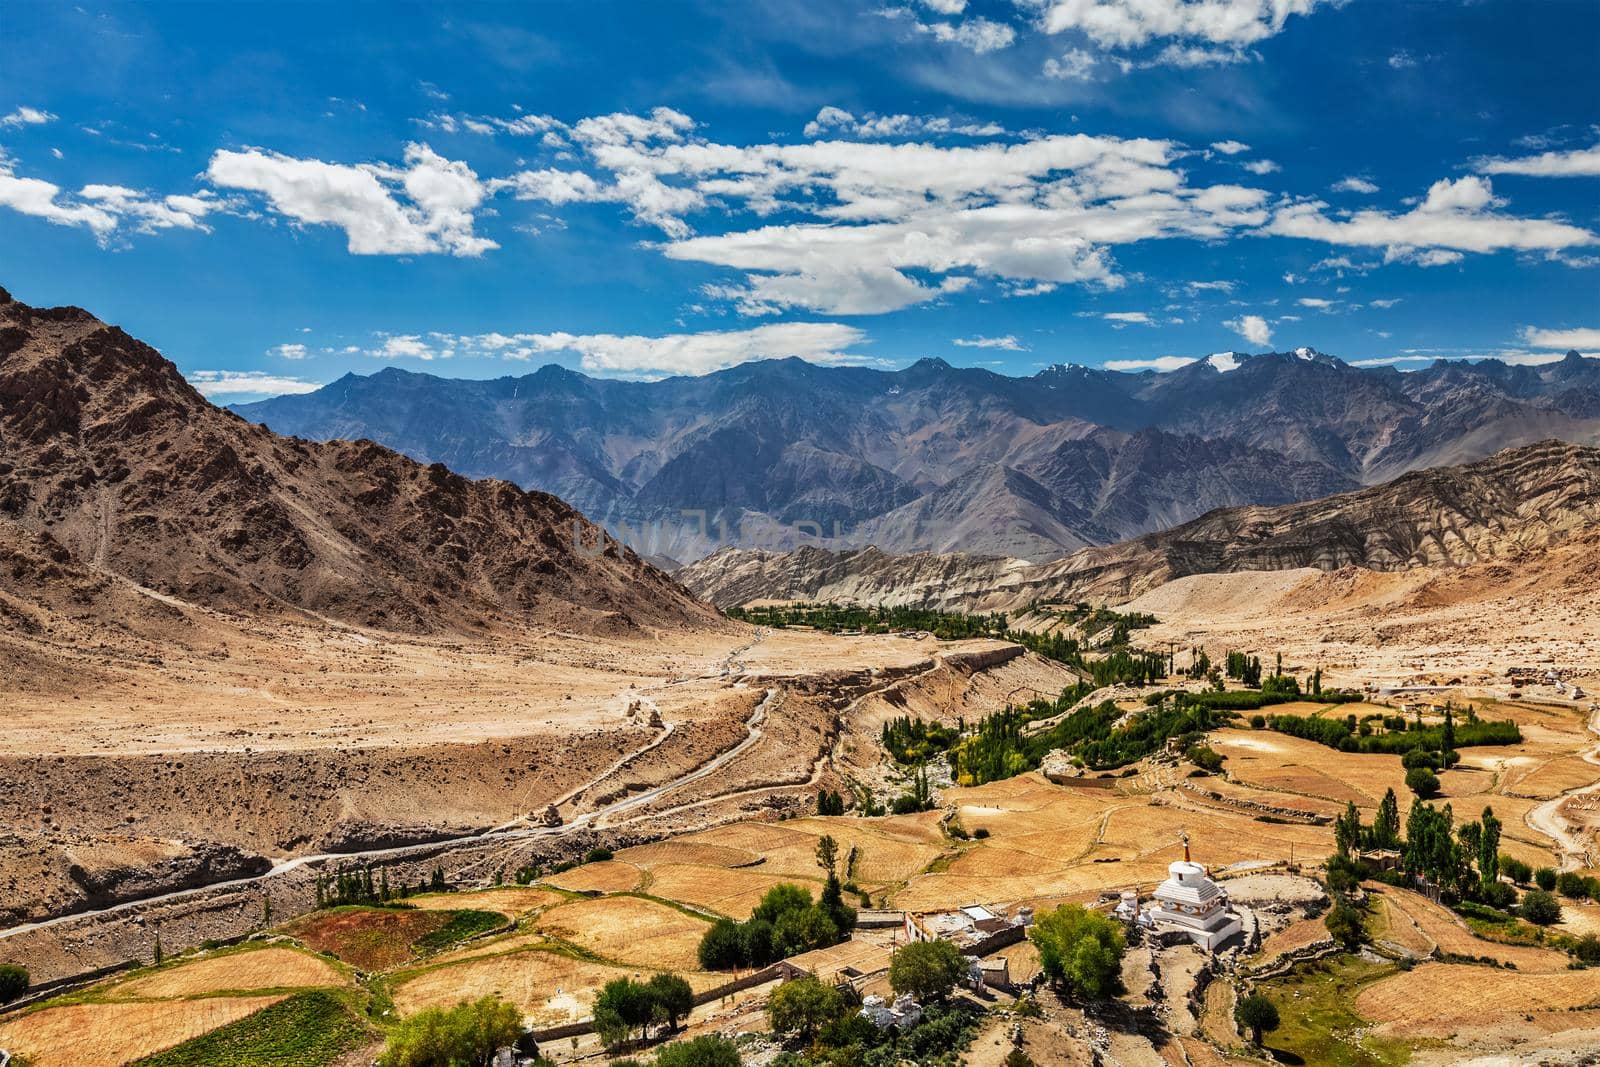 View of Indus valley in Himalayas near Likir by dimol